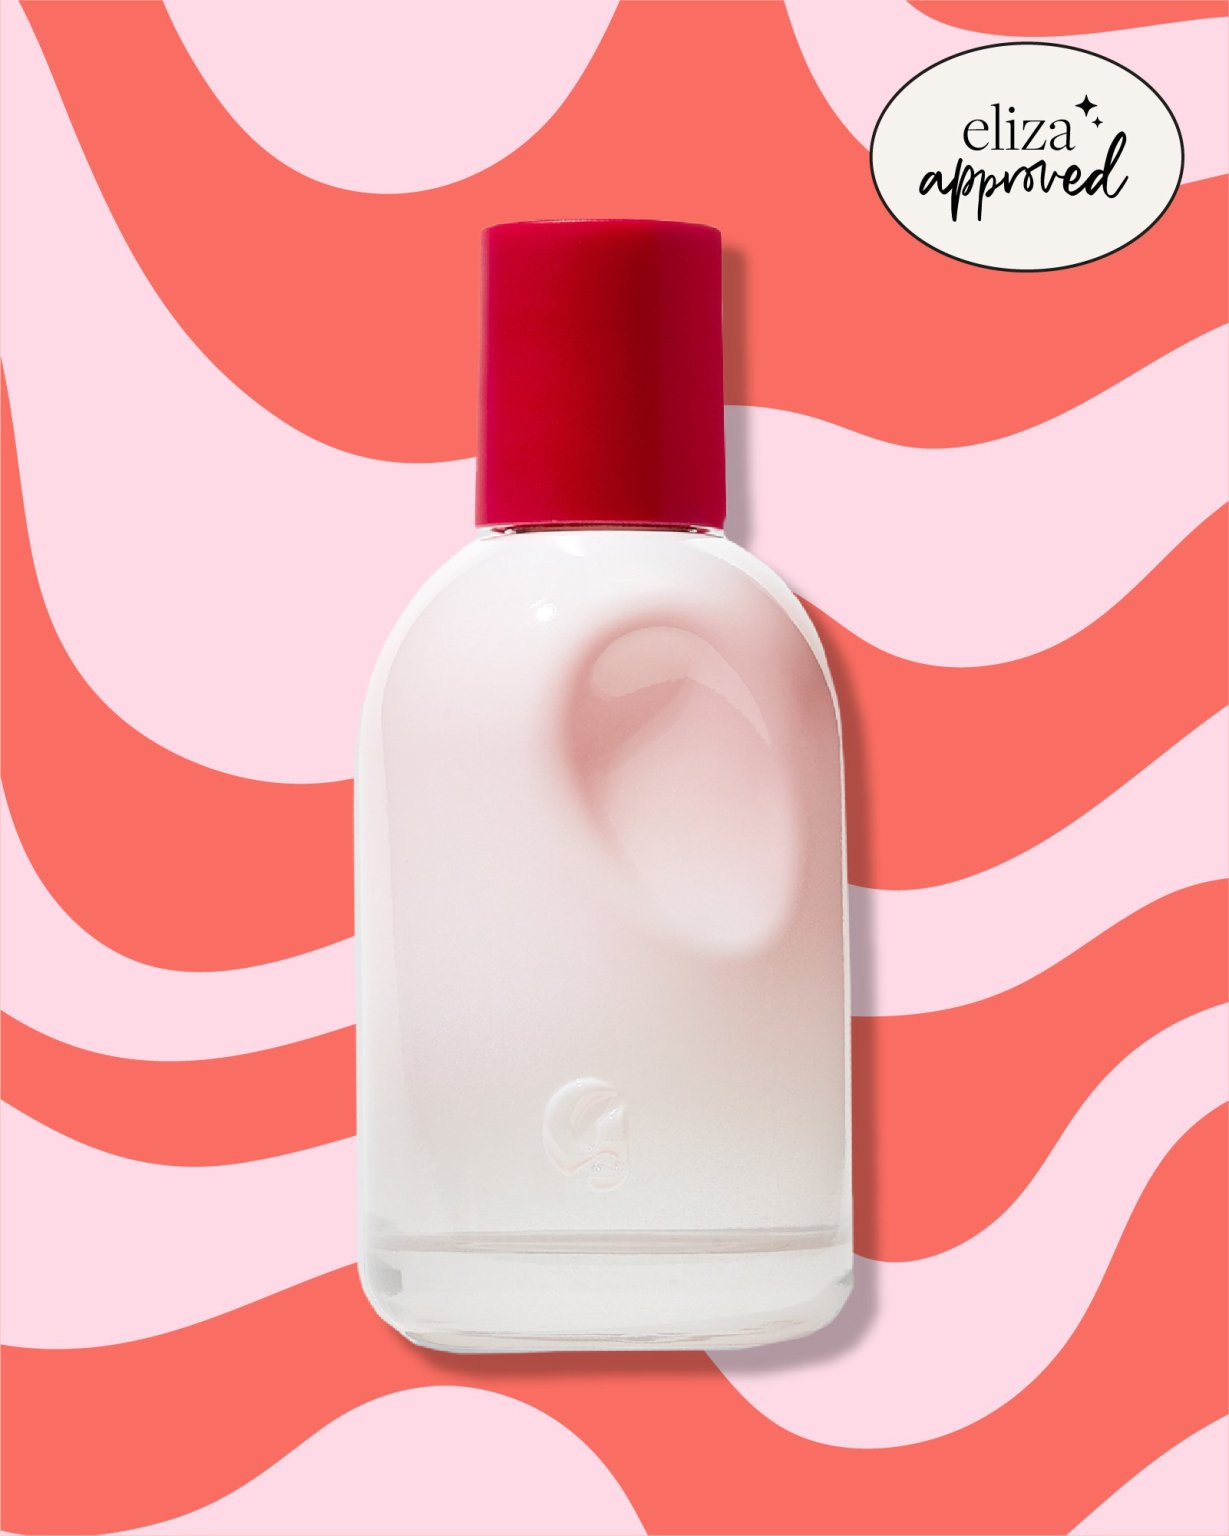 Glossier You Perfume: Why Exactly Is it So Popular And Is It Worth It?